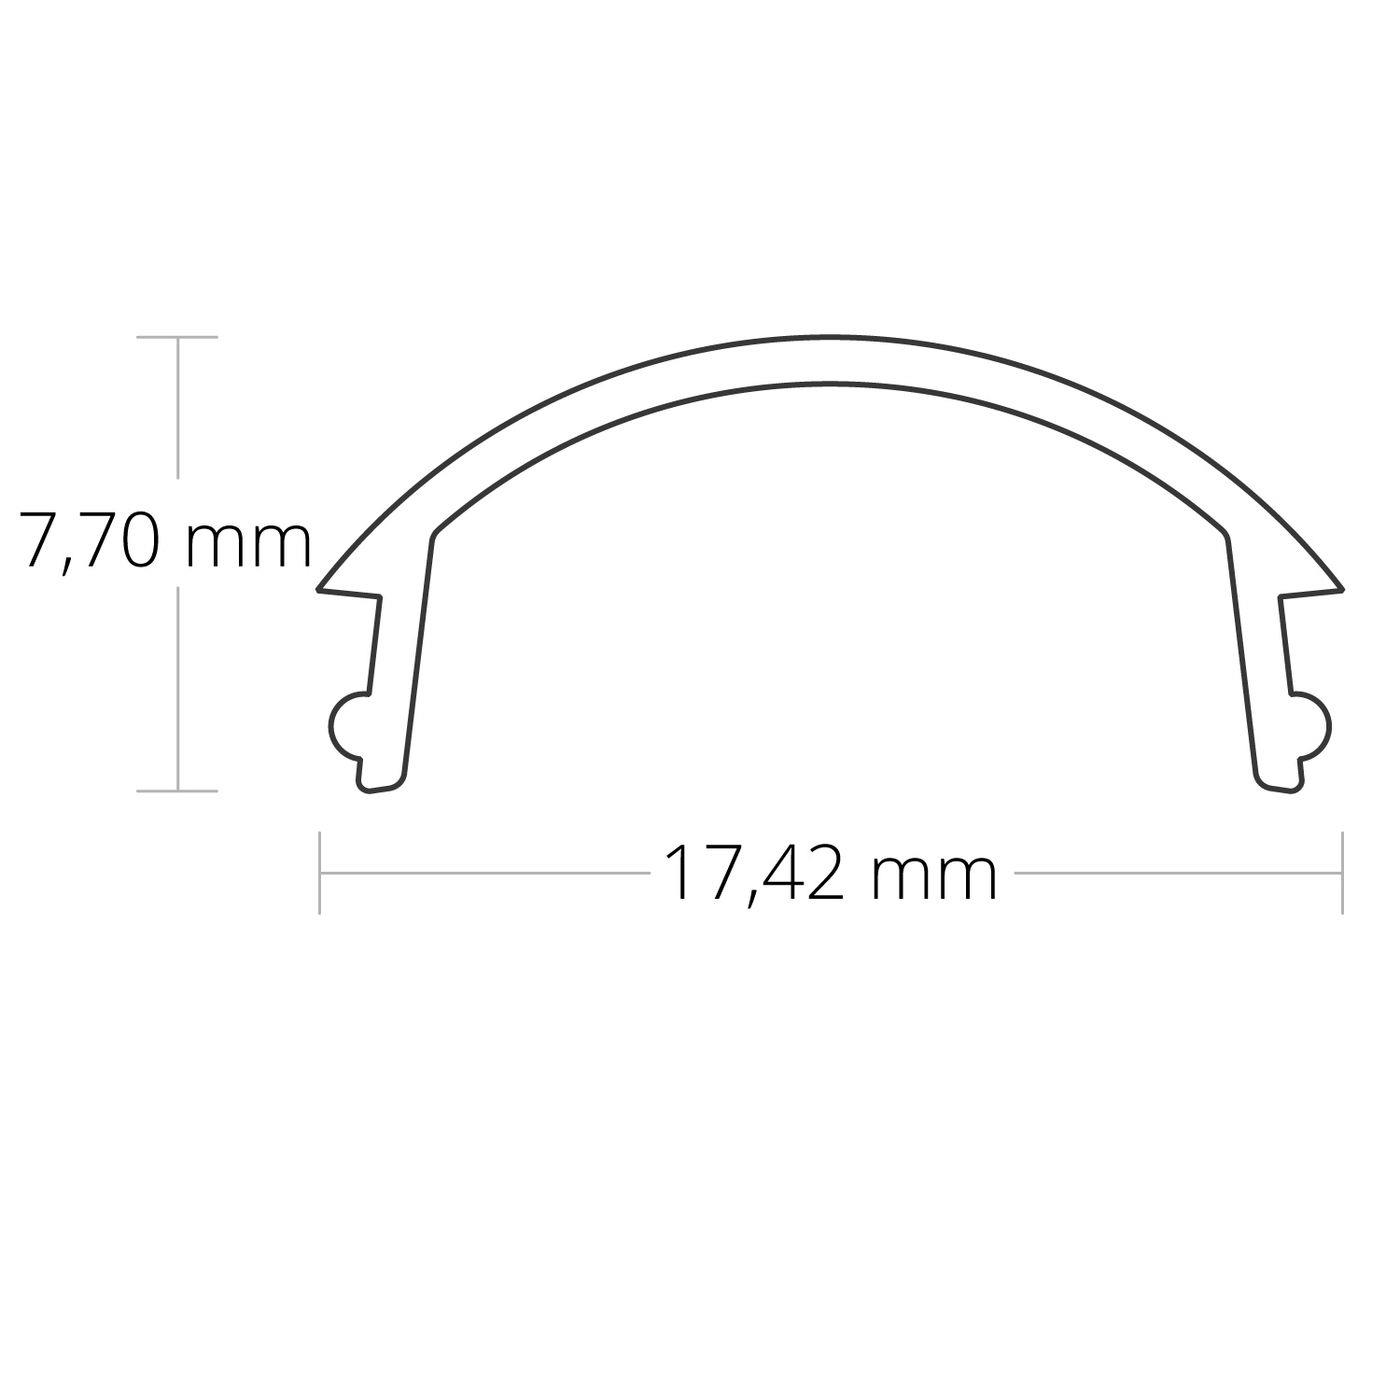 2m Cover C39 for people profile TWIN PL12 17,4x7,7mm Plastic